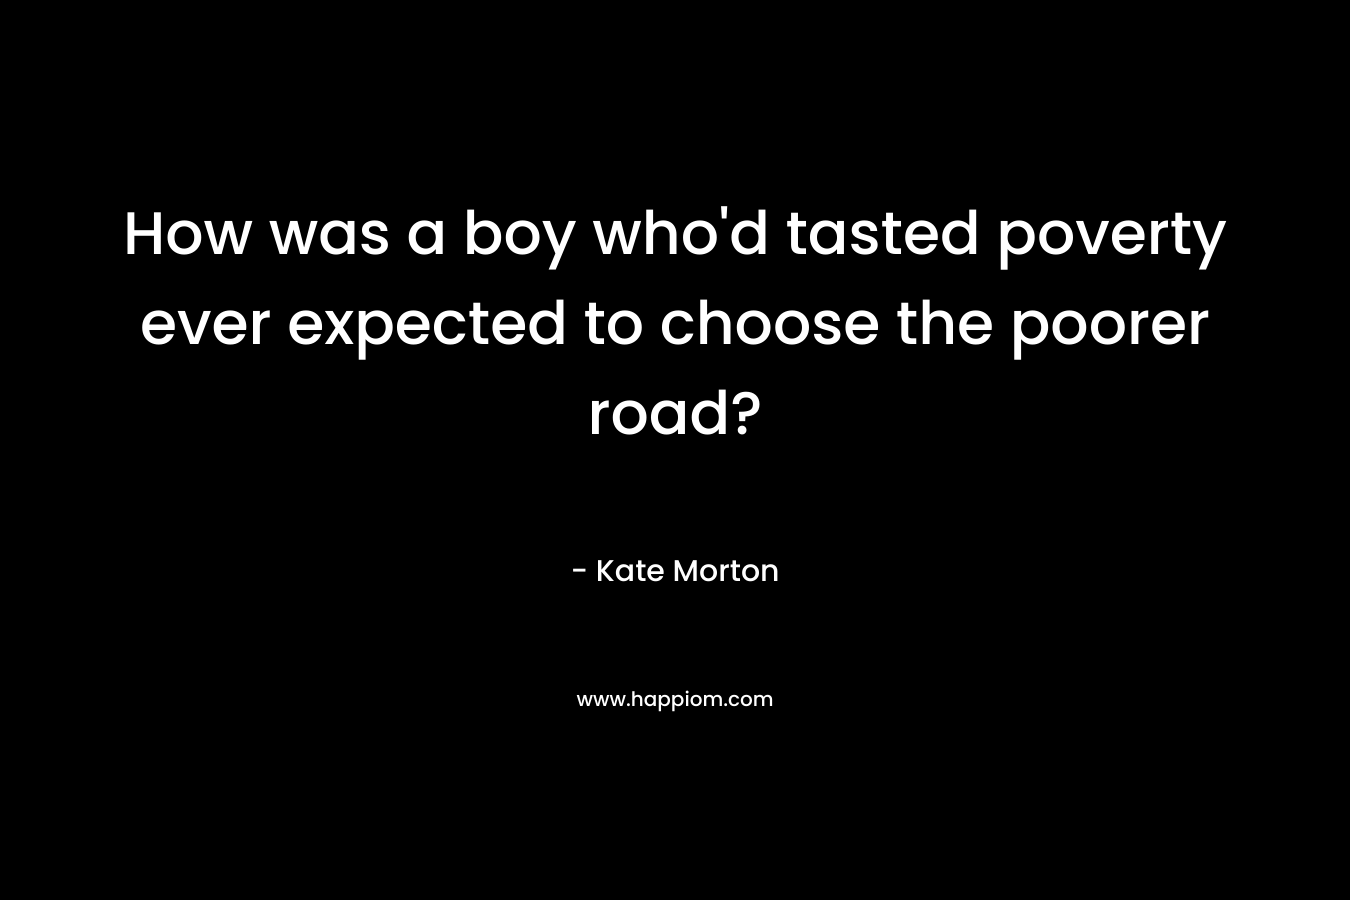 How was a boy who'd tasted poverty ever expected to choose the poorer road?